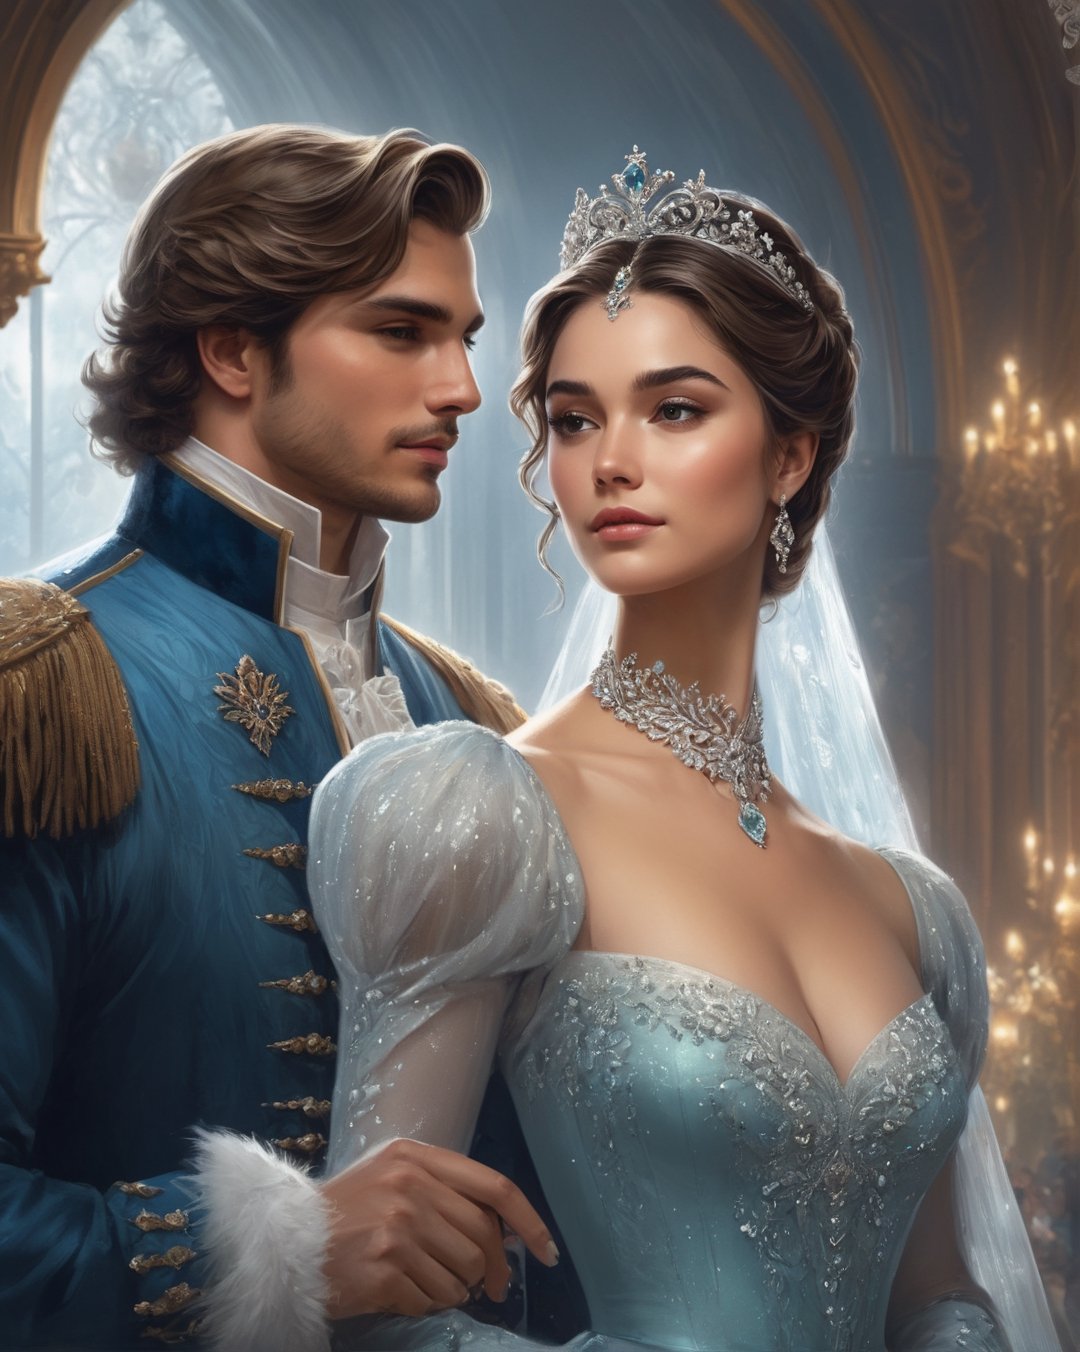 a man and a woman standing next to each other, concept art, by Charlie Bowater, sots art, cinderella, jade tiara and necklace, private moment, alejandro burdisio art, thumbnail, royal wedding, f/9, face detailing, promotional artwork, commission for, olivia culpo as milady de winter, on cg society, card art, showcase